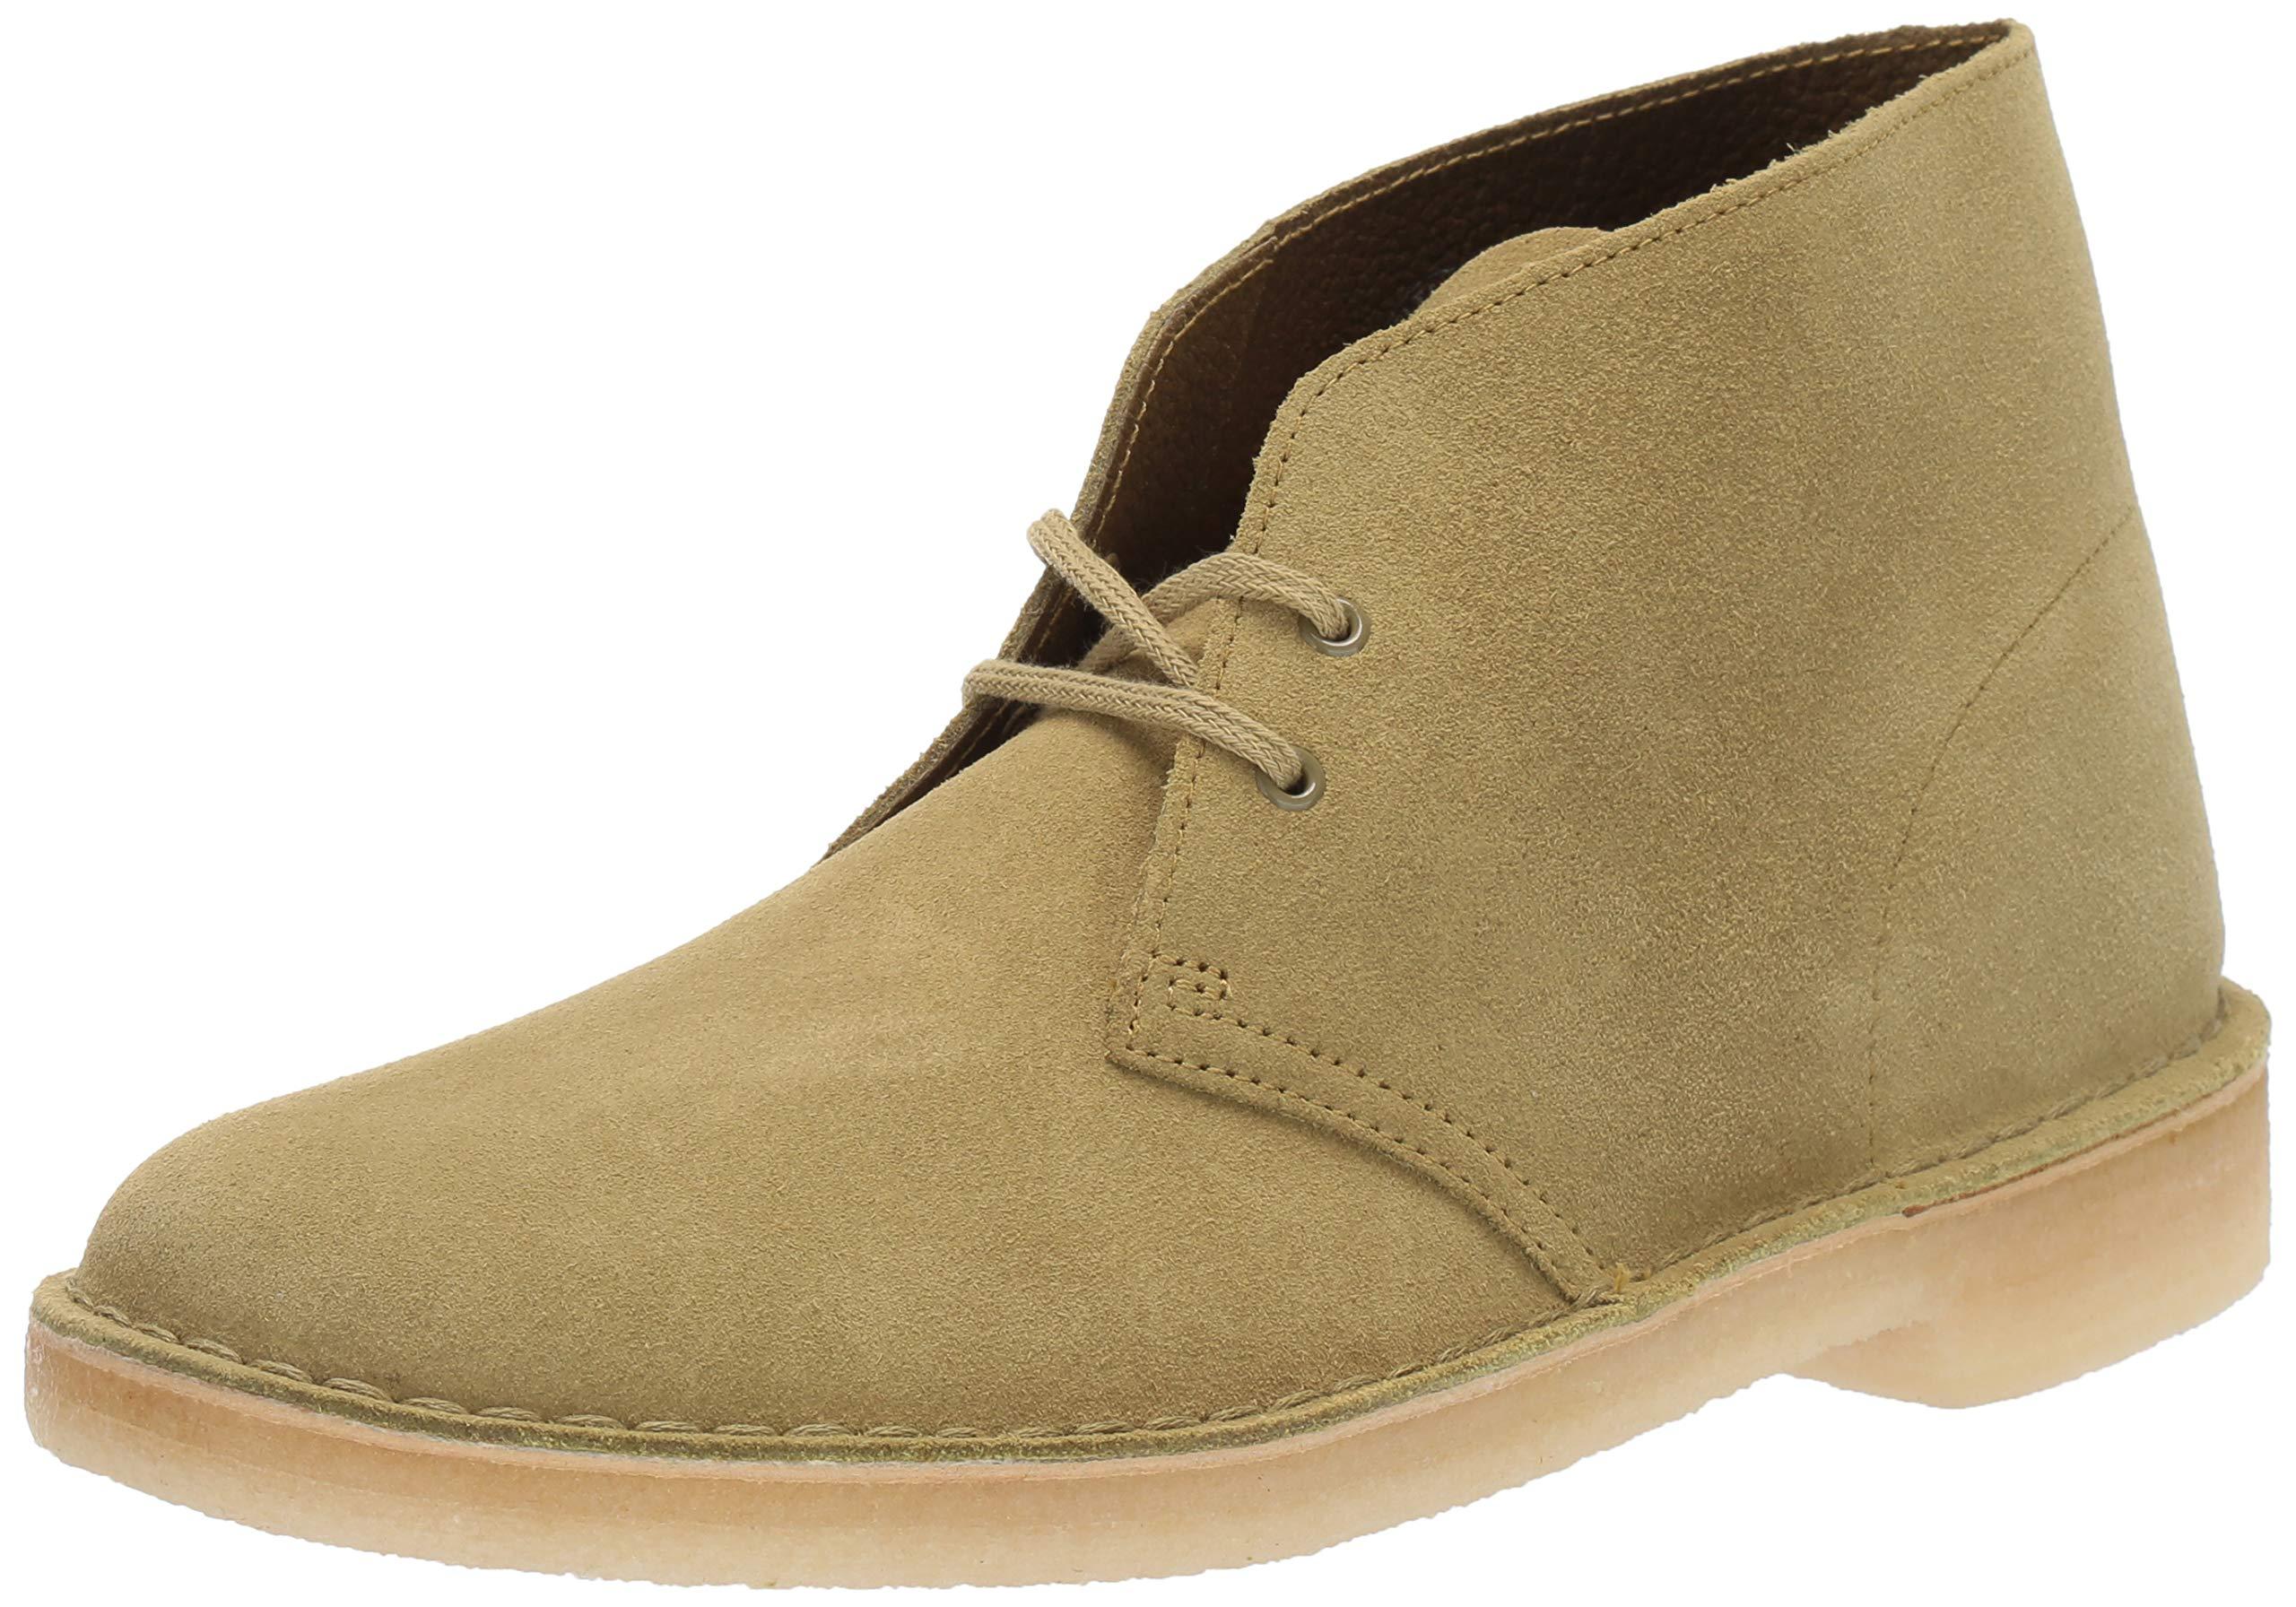 Clarks Suede Desert Chukka Boot in Khaki Suede (Natural) for Men - Save ...